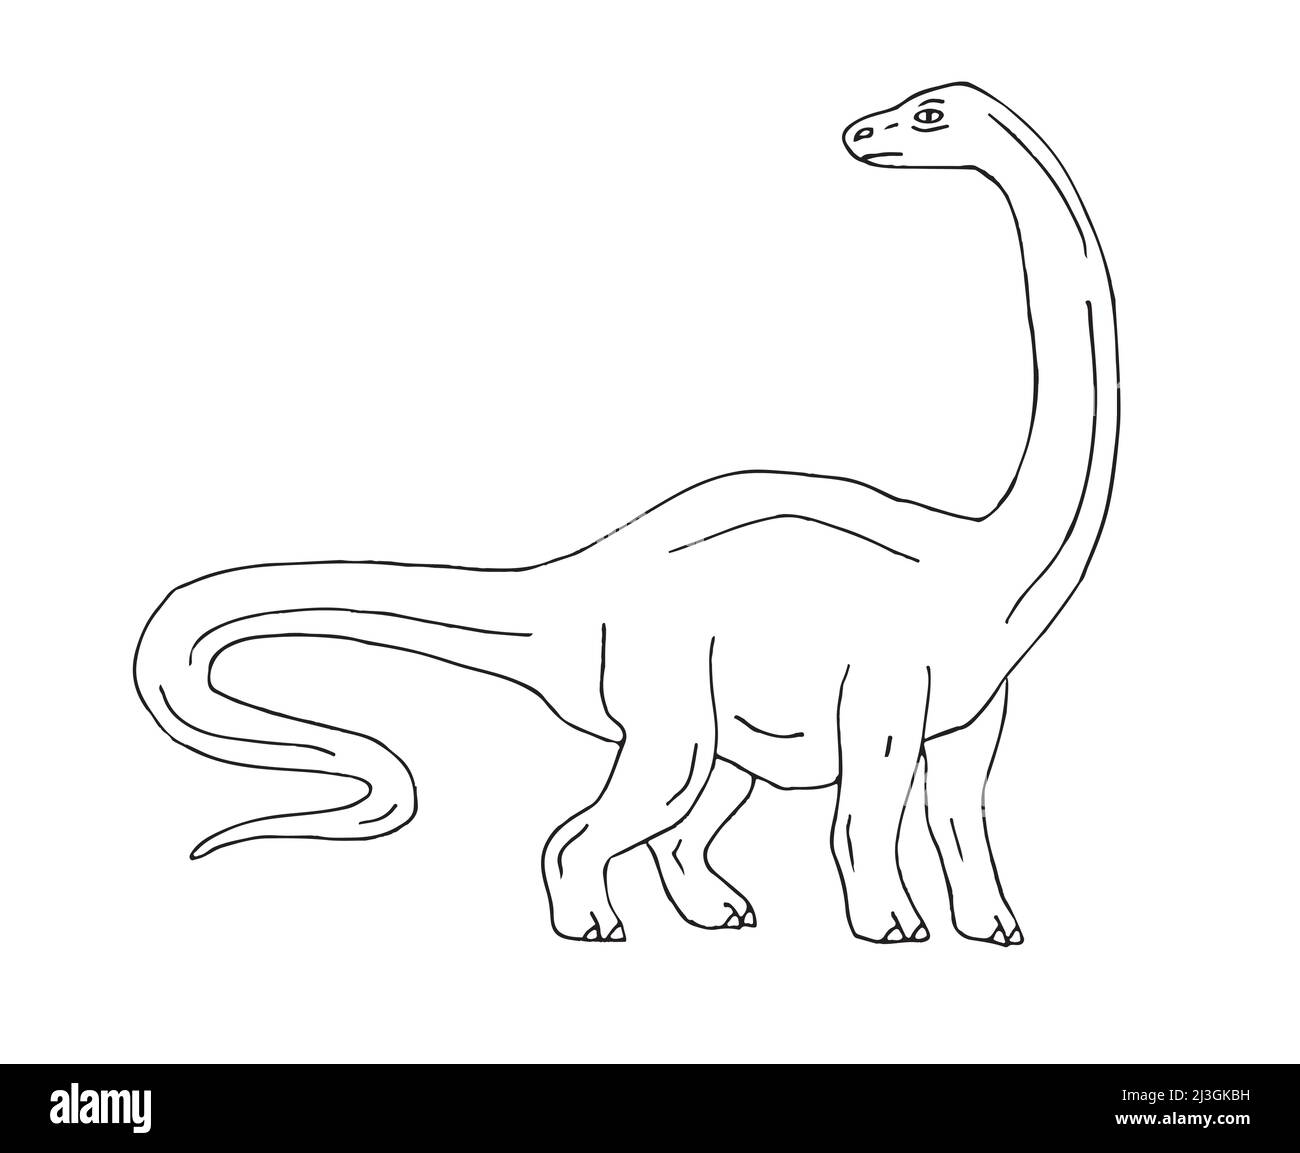 How to Draw a Diplodocus - HelloArtsy